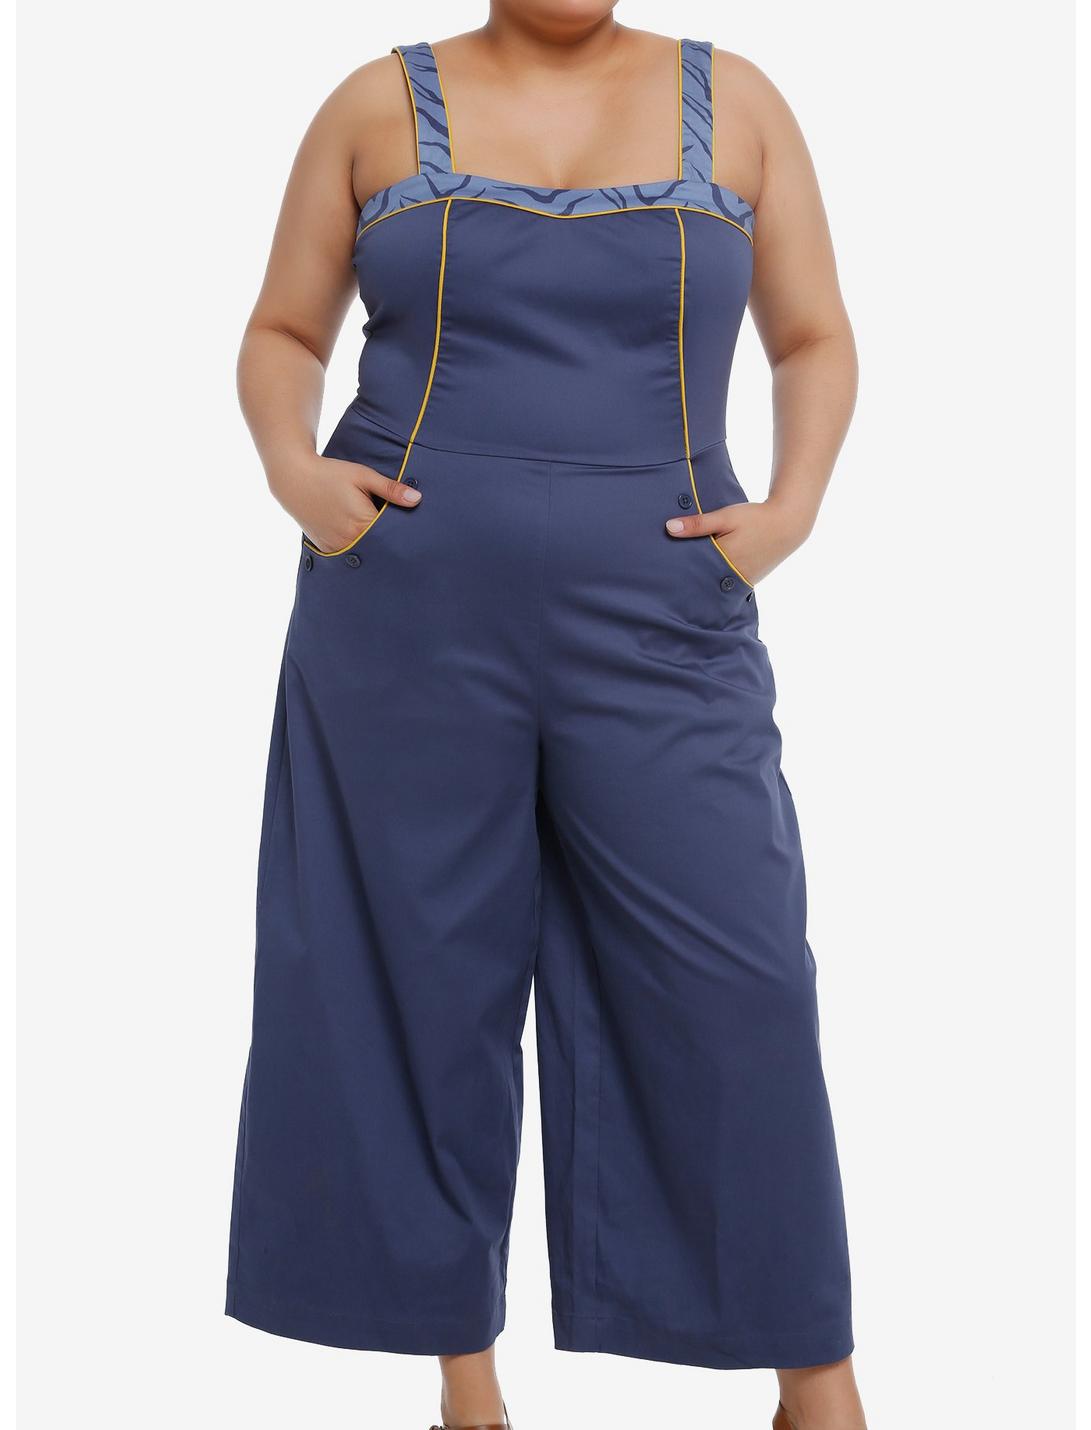 Her Universe Star Wars Ahsoka Tano Retro Jumpsuit Plus Size Her Universe Exclusive, NAVY  YELLOW, hi-res